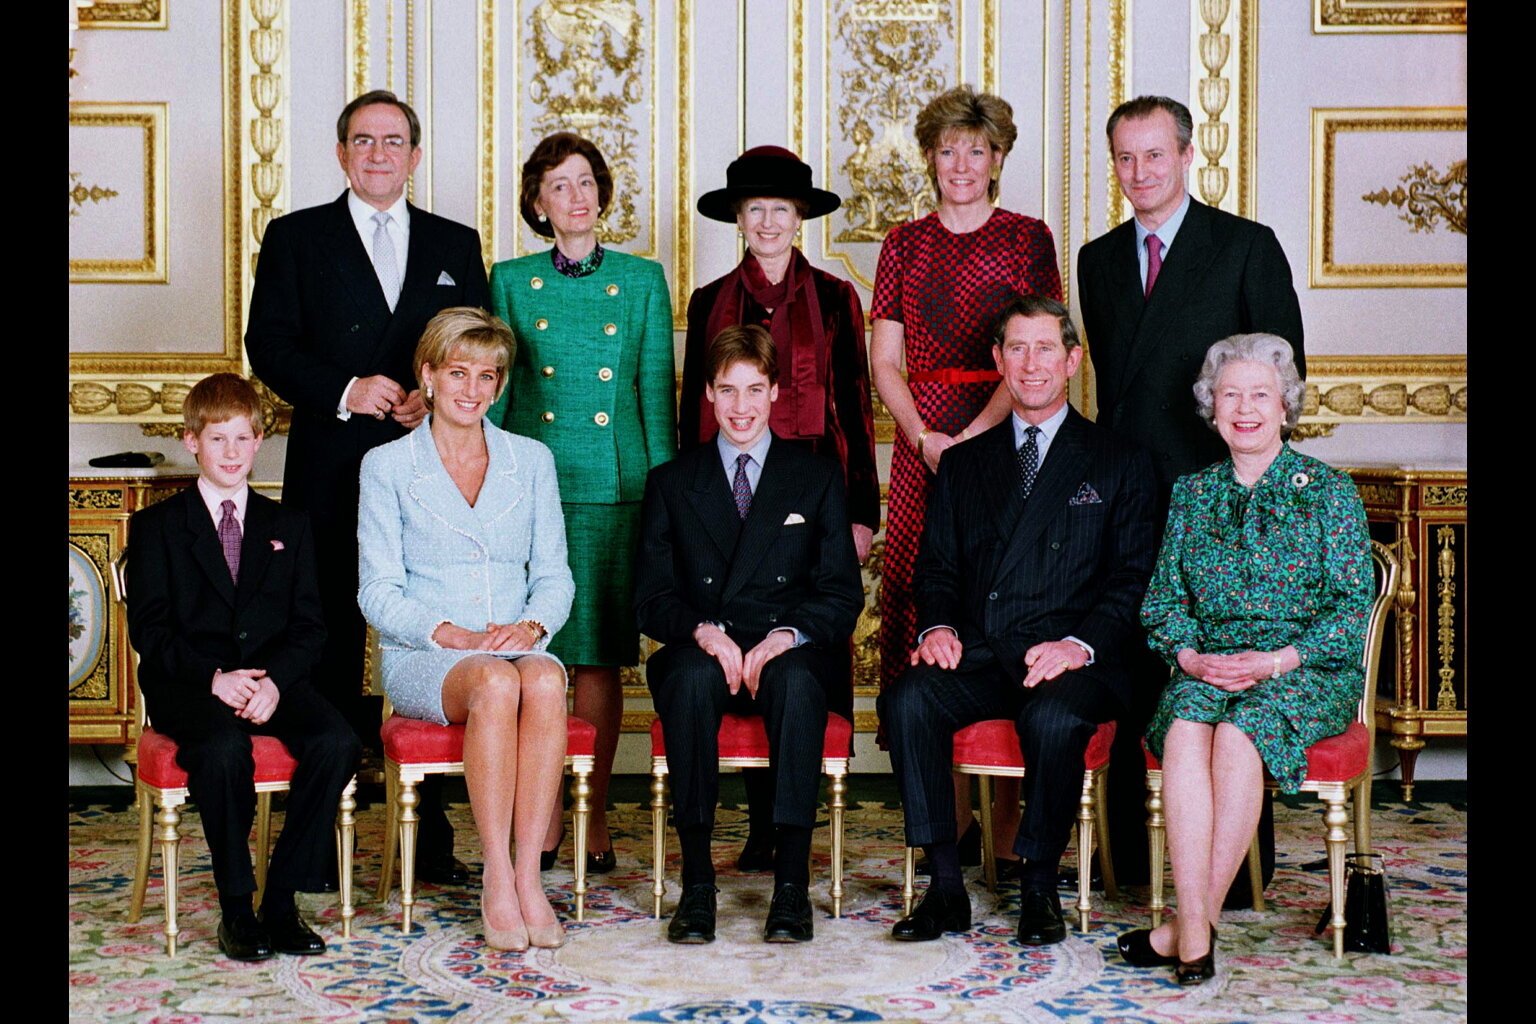 Prince William's confirmation with his five grandparents standing behind him (left to right): Konstantinos II, King of the Hellenes; Lady Susan Hussey; Alexandra, Princess of Kent; Natalia, Duchess of Westminster; and Norton Knatchbul